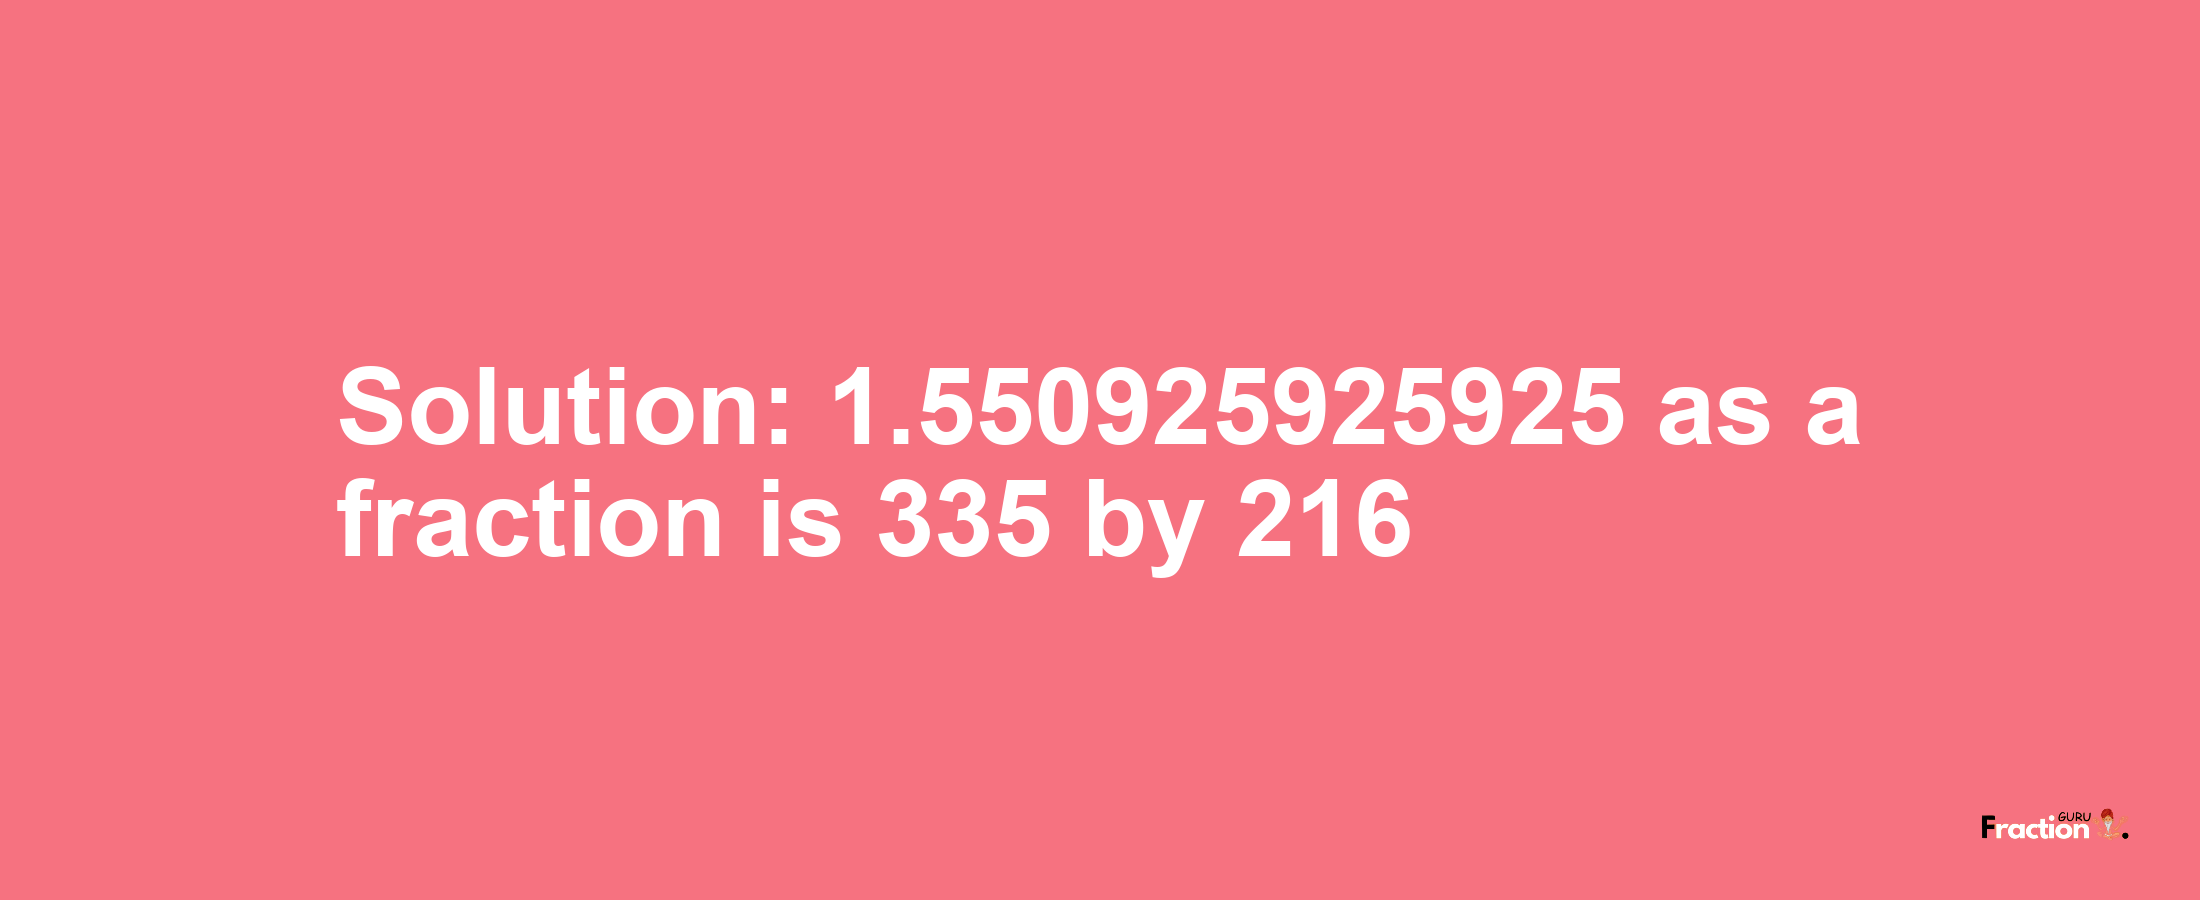 Solution:1.550925925925 as a fraction is 335/216